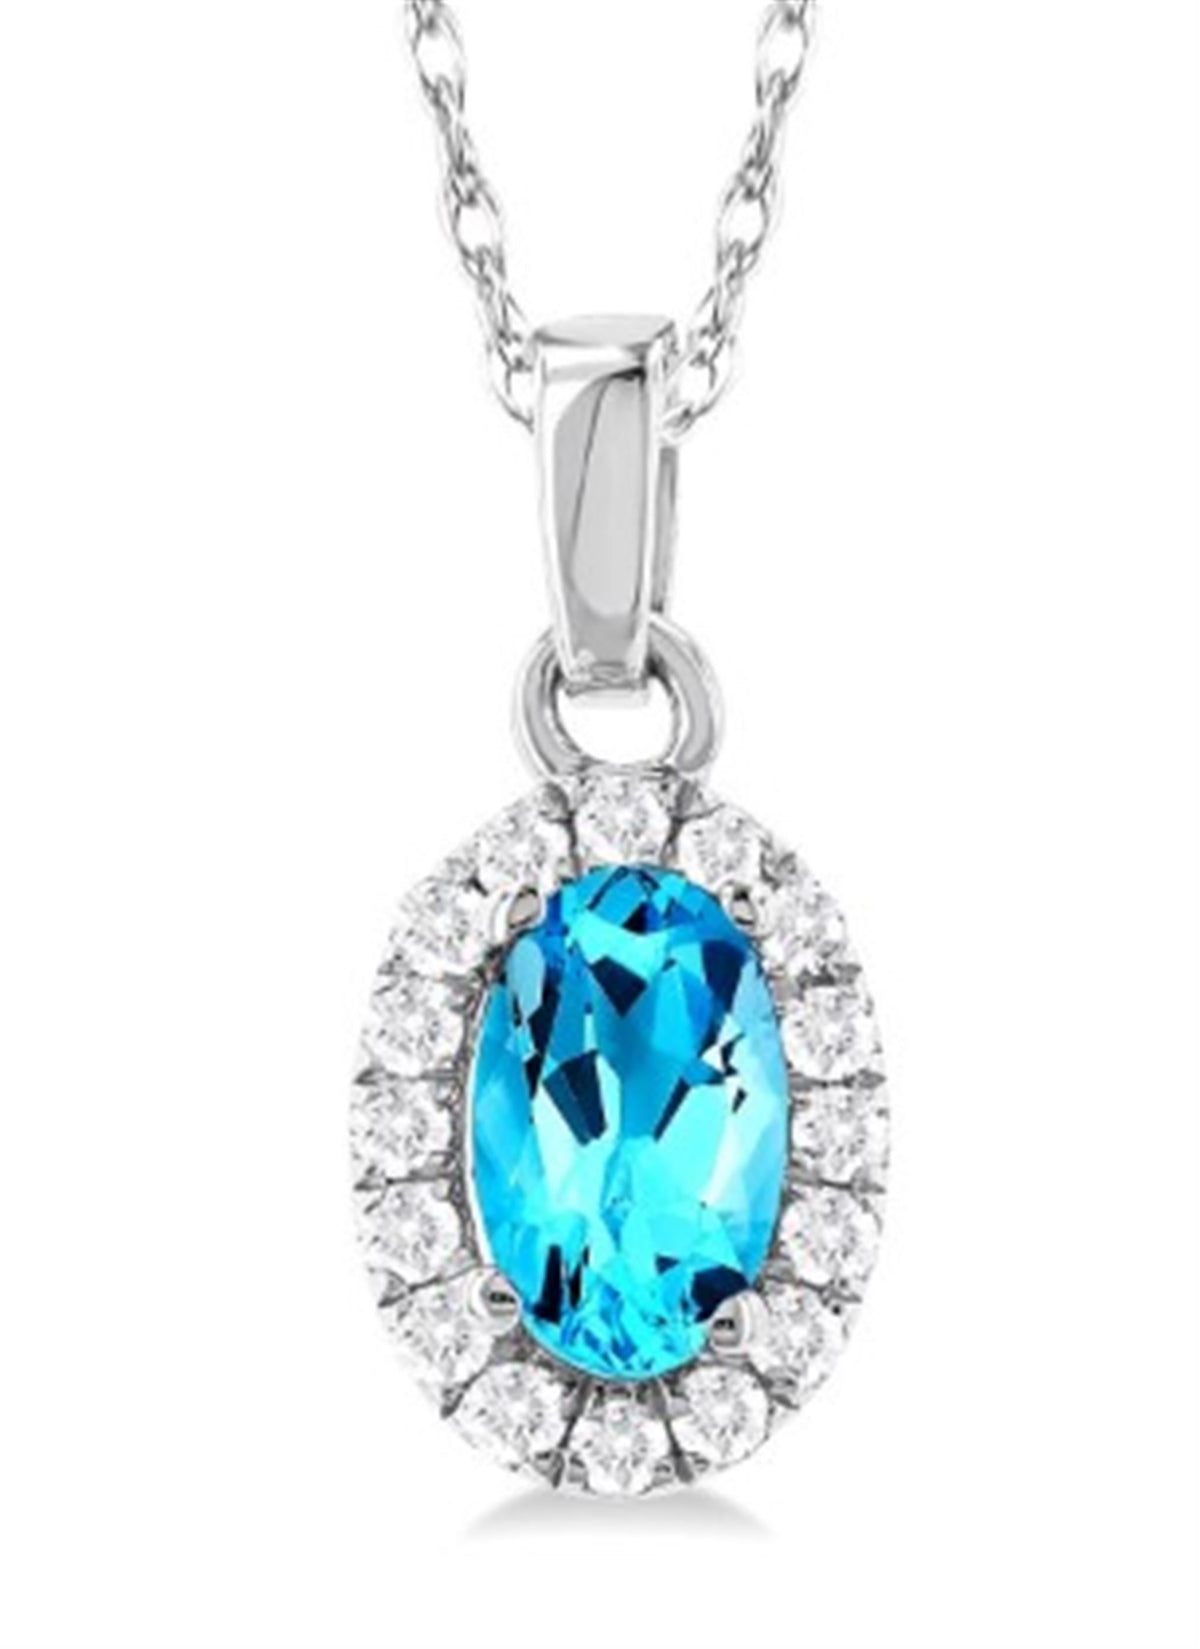 10Kt White Gold Center Of My World Halo Pendant With Blue Topaz and Natural Diamonds